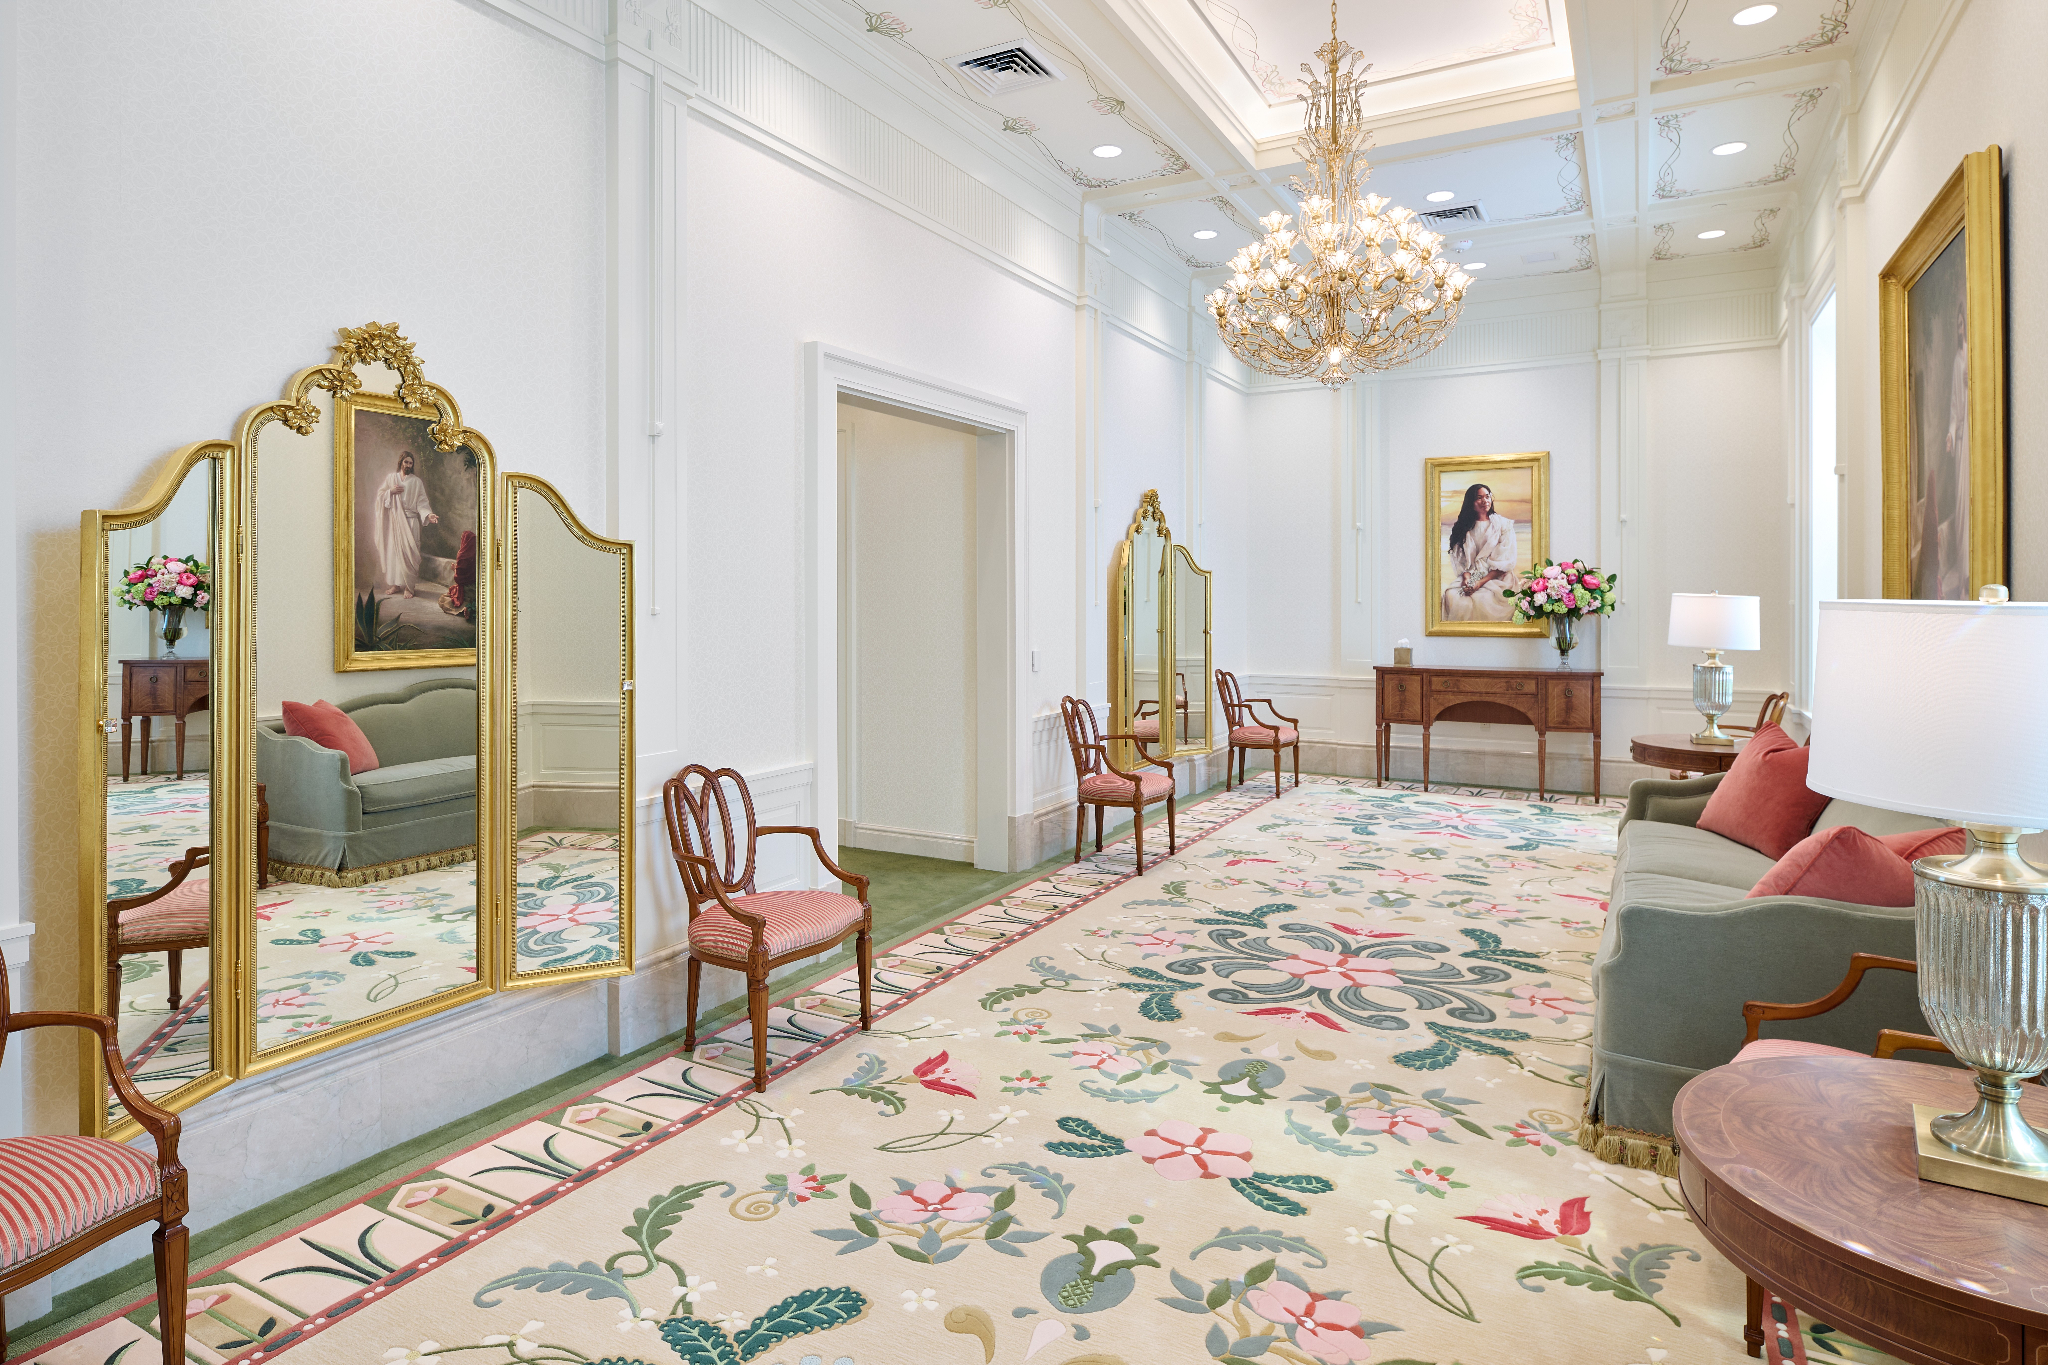 A white room with a large floral-patterned rug on the floor, with two mirrors having a gold frame and hanging from the wall.